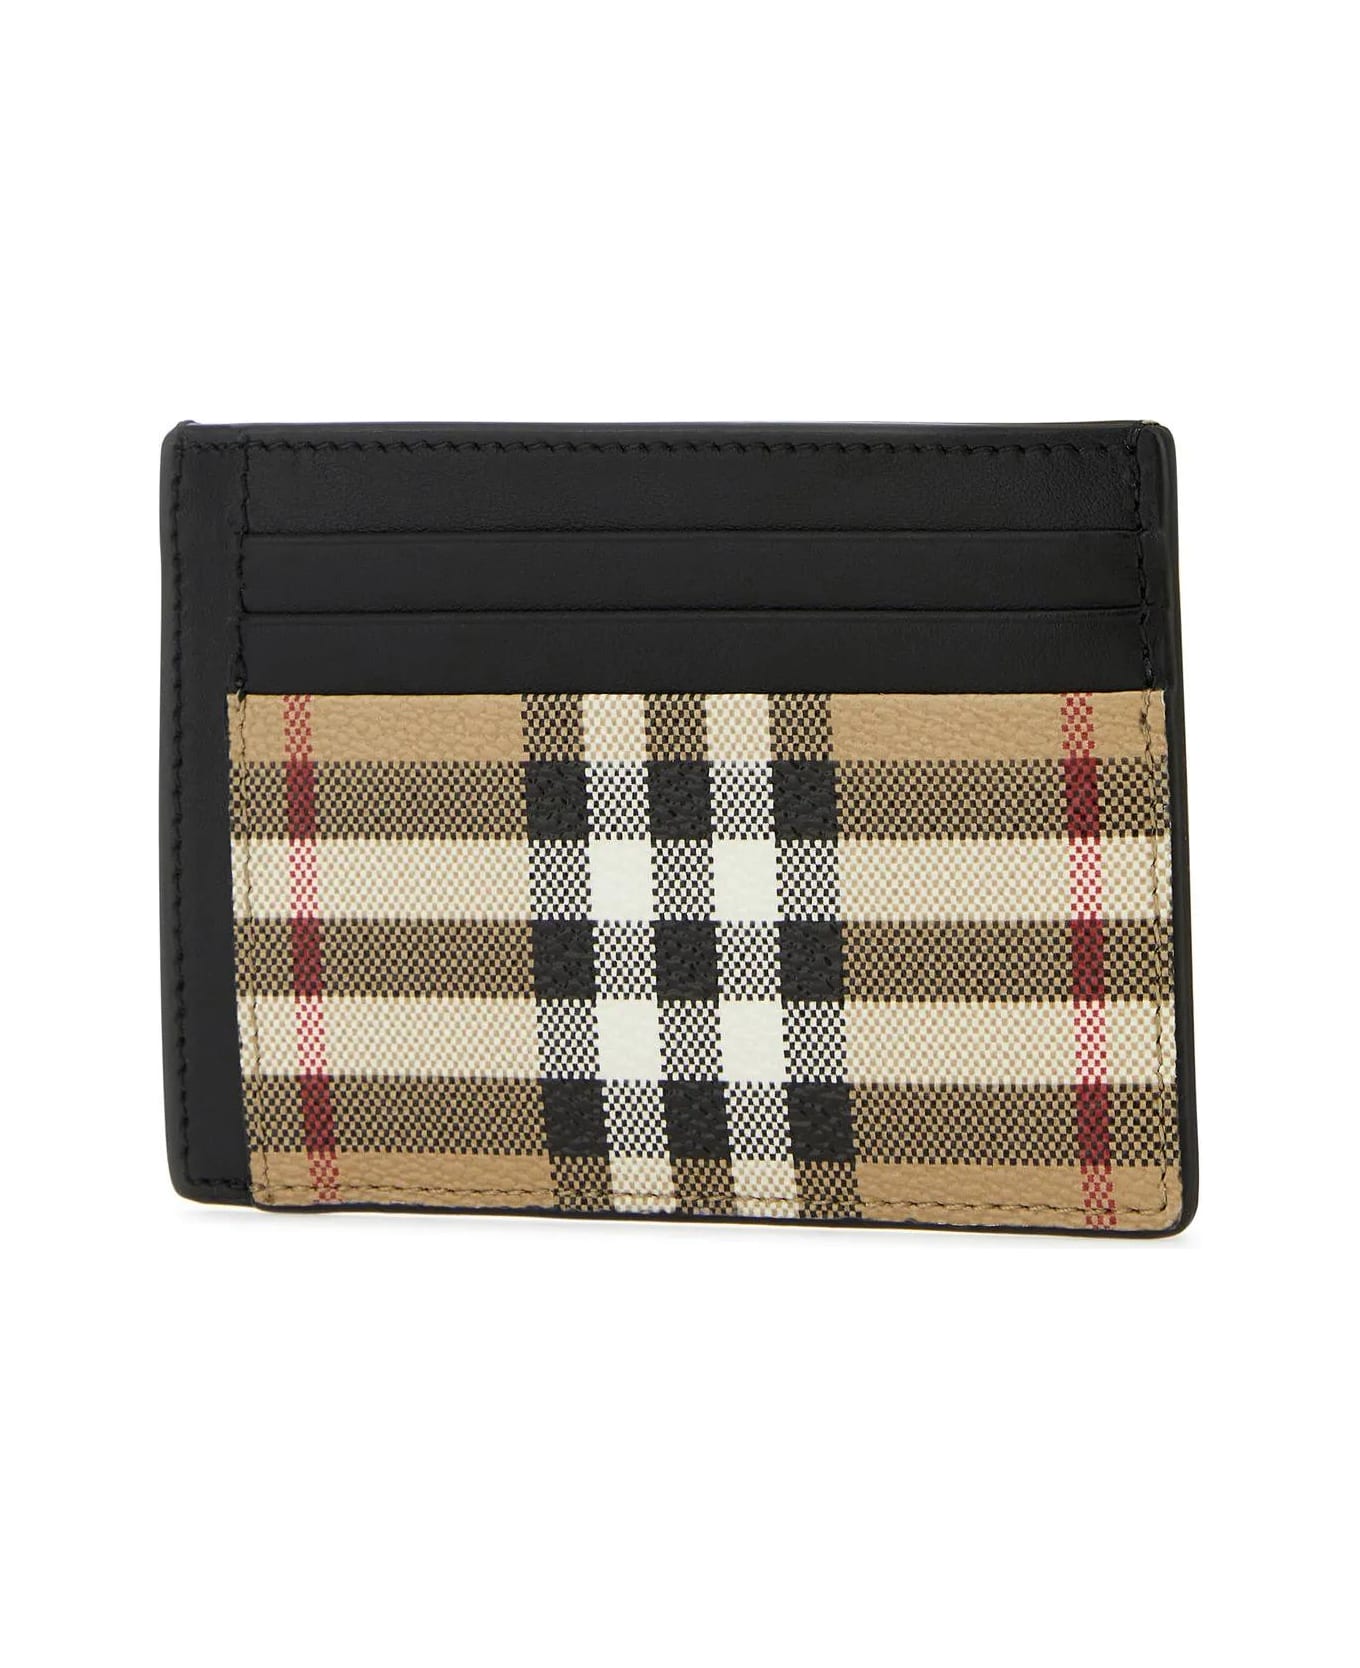 Burberry Printed Canvas Cardholder - Archive Beige